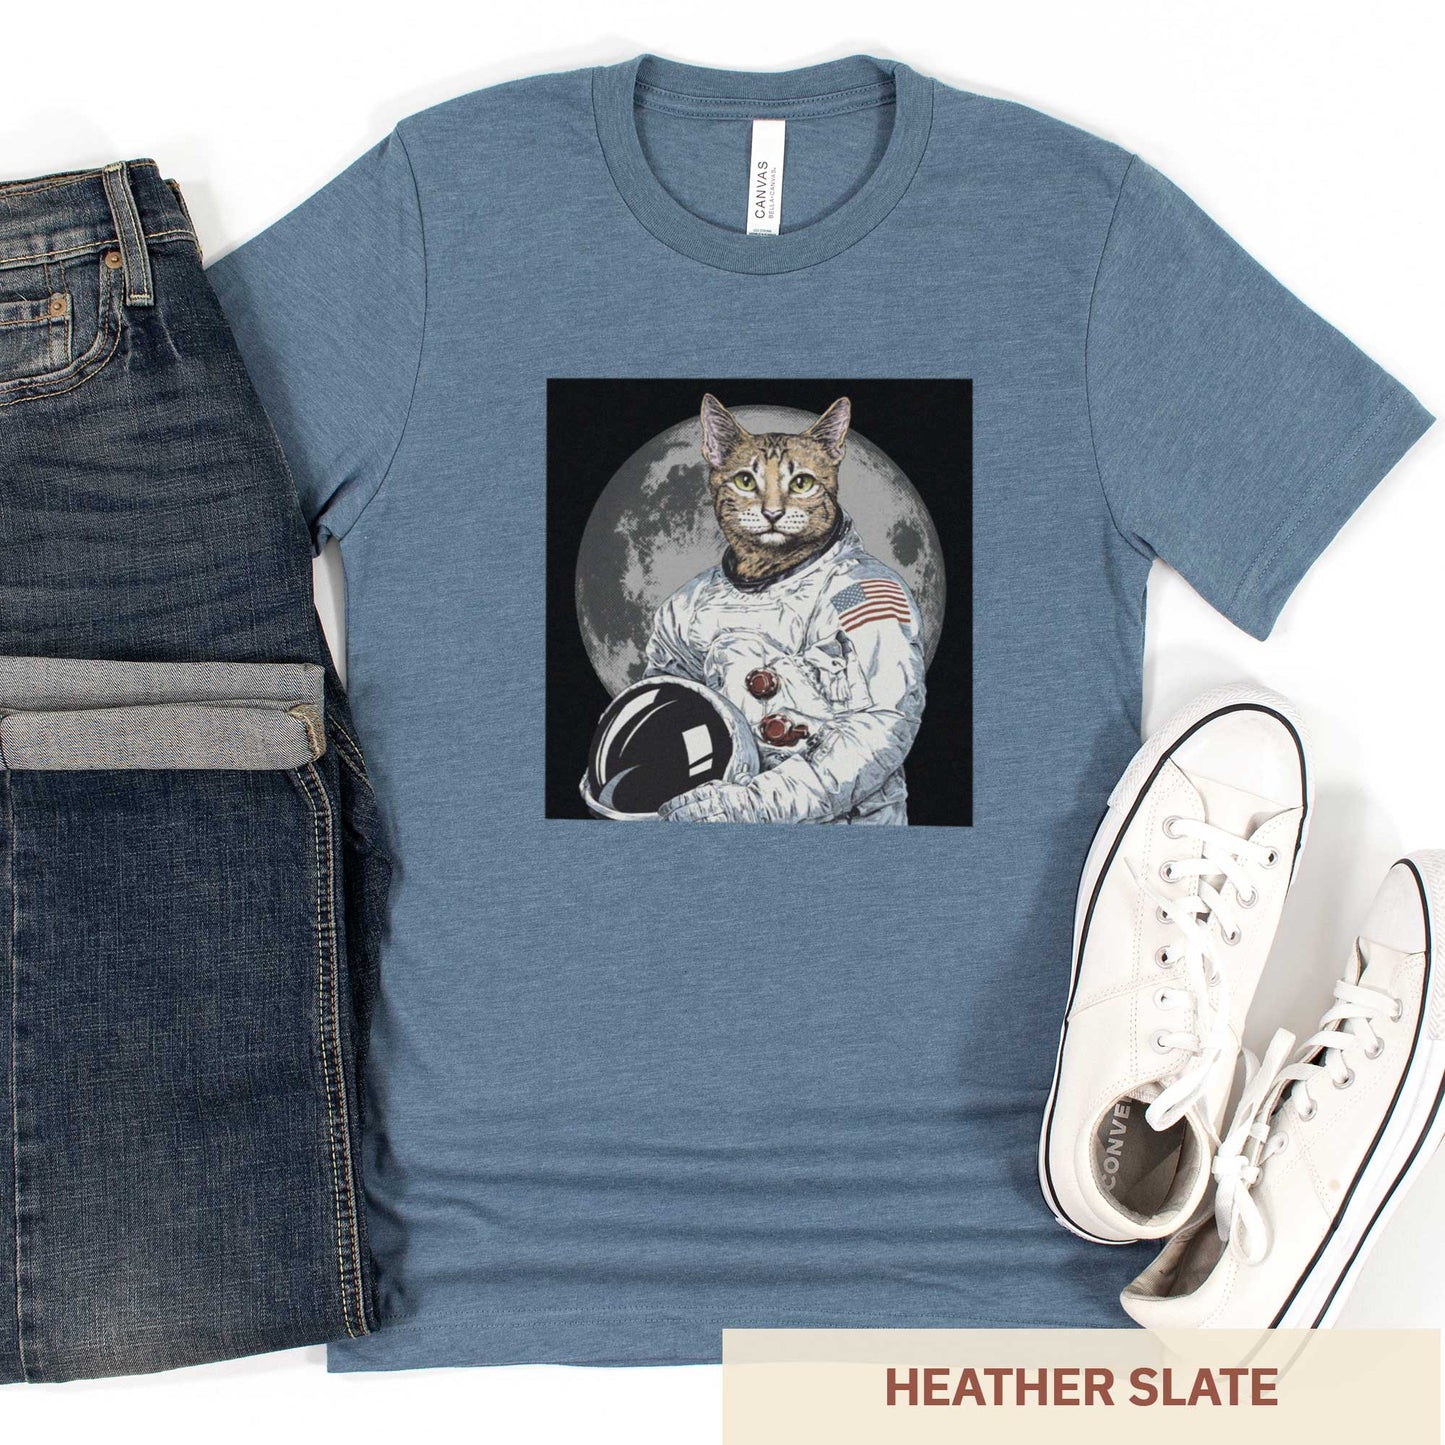 A heather slate Bella Canvas t-shirt featuring an illustrated portrait of a cat as a NASA astronaut with the moon in the background.